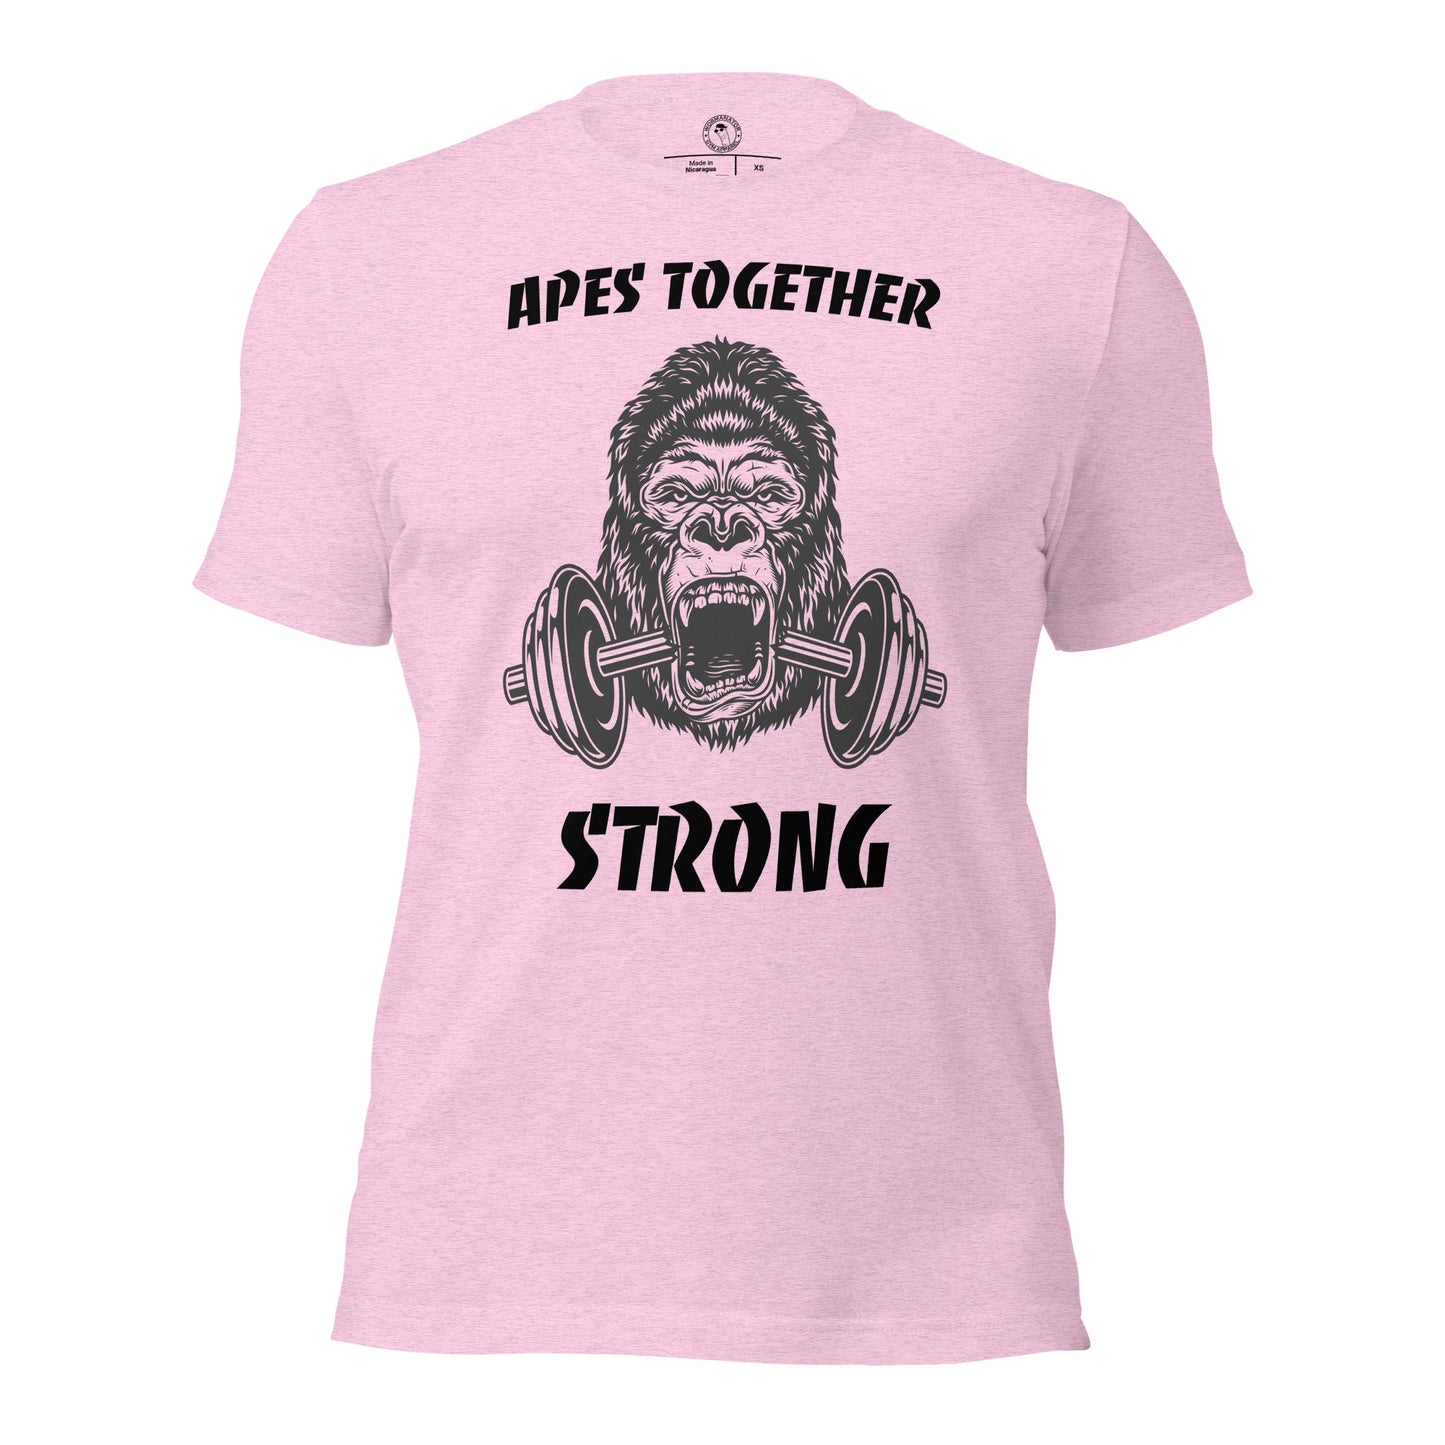 Apes Together Strong Shirt in Heather Prism Lilac